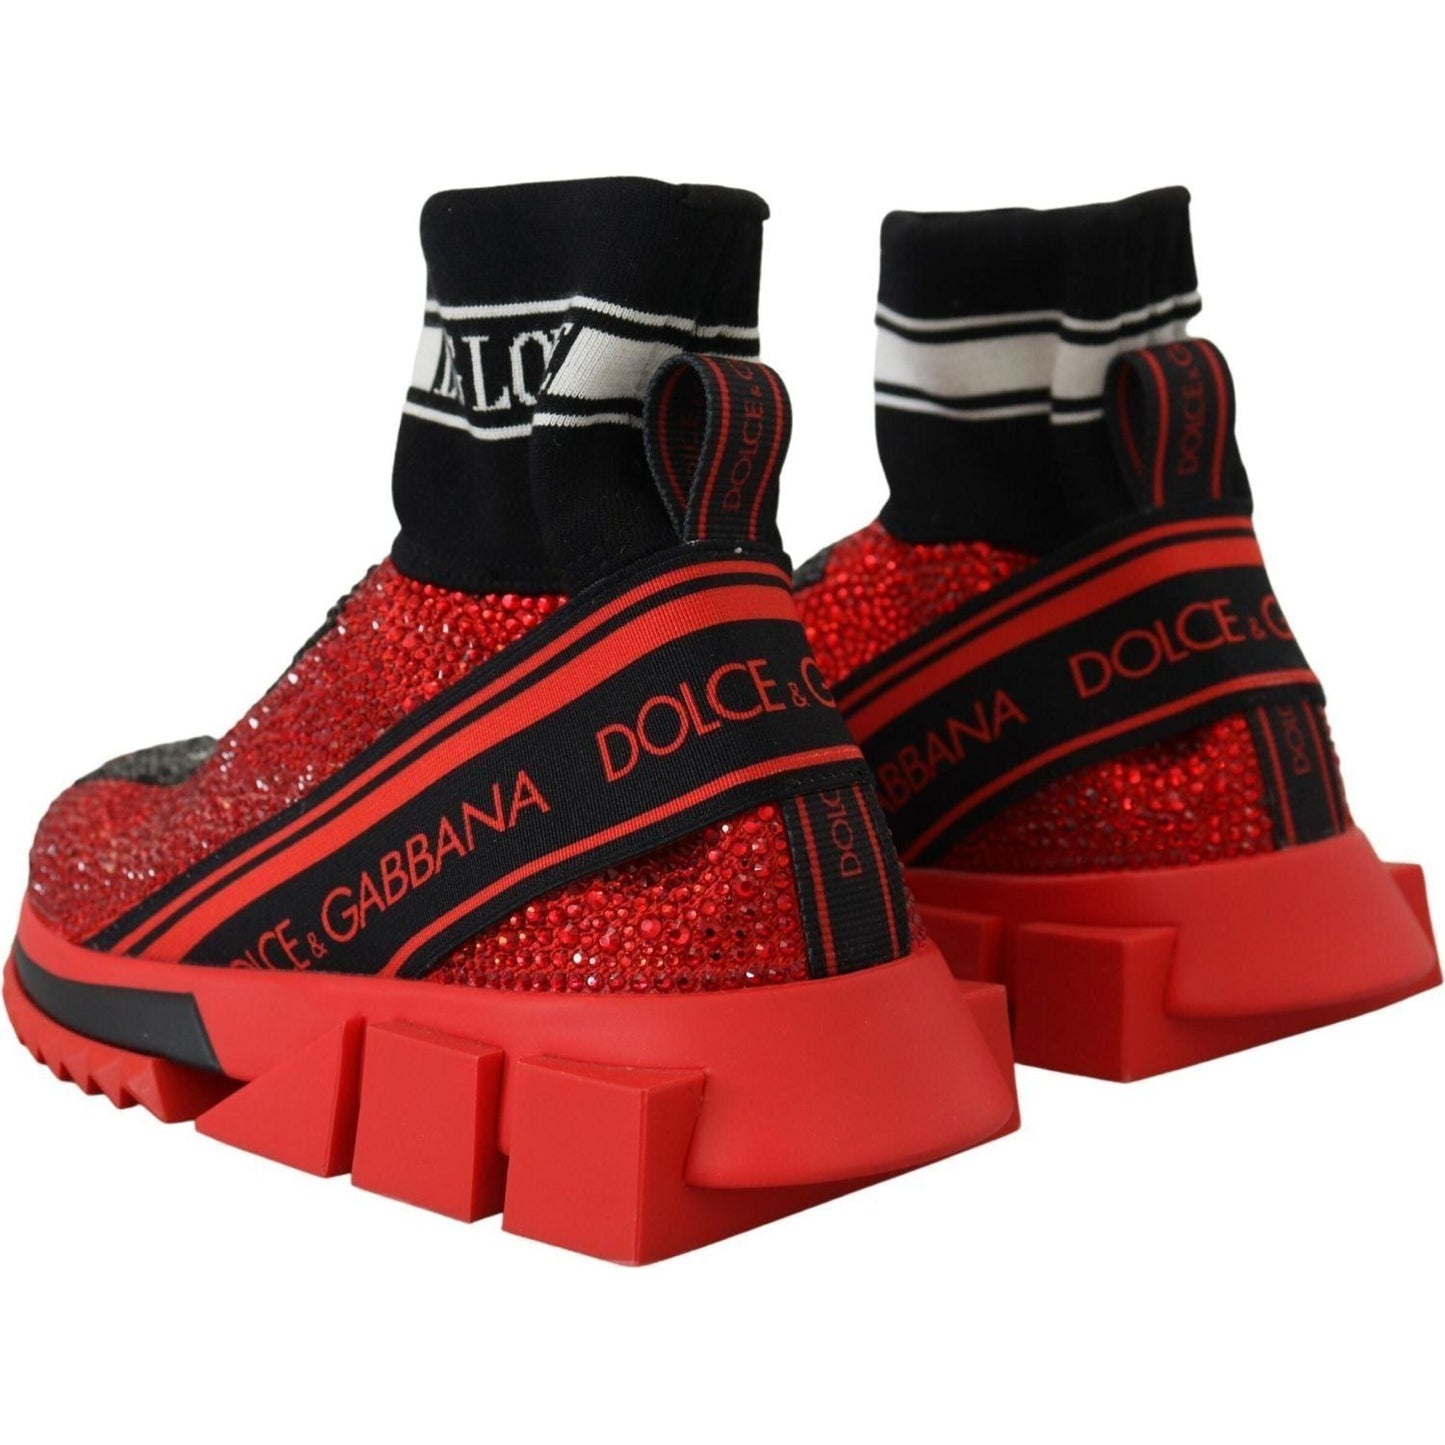 Dolce & Gabbana Exquisite Red Sorrento Slip-On Sneakers red-bling-sorrento-sneakers-socks-shoes IMG_5077-scaled-13687cb4-5f0.jpg